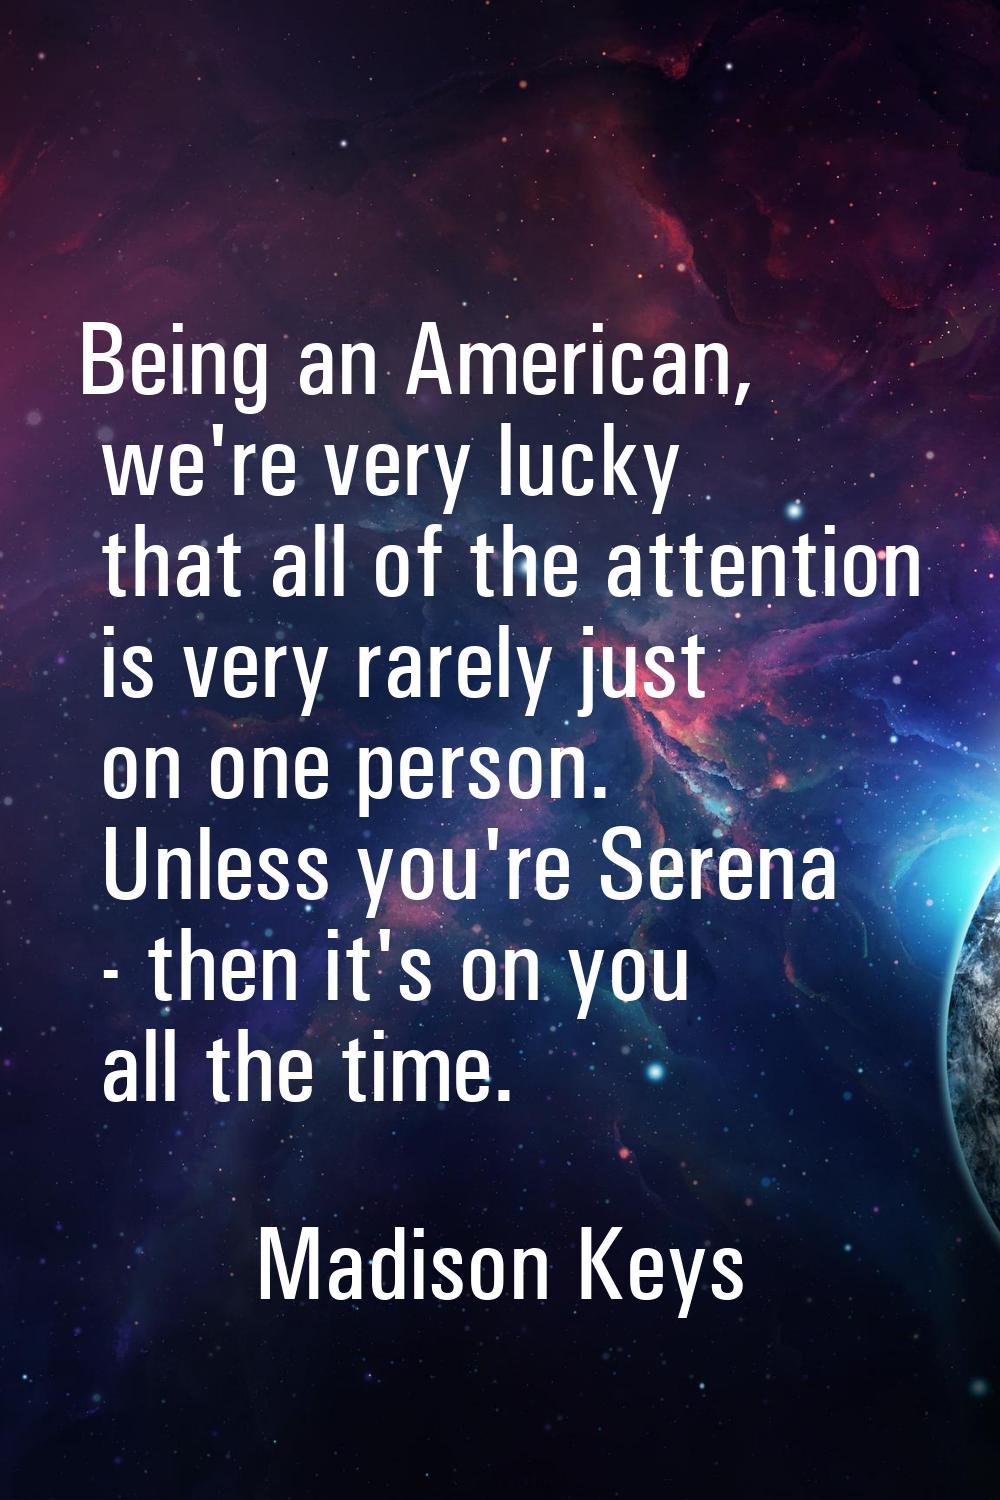 Being an American, we're very lucky that all of the attention is very rarely just on one person. Un